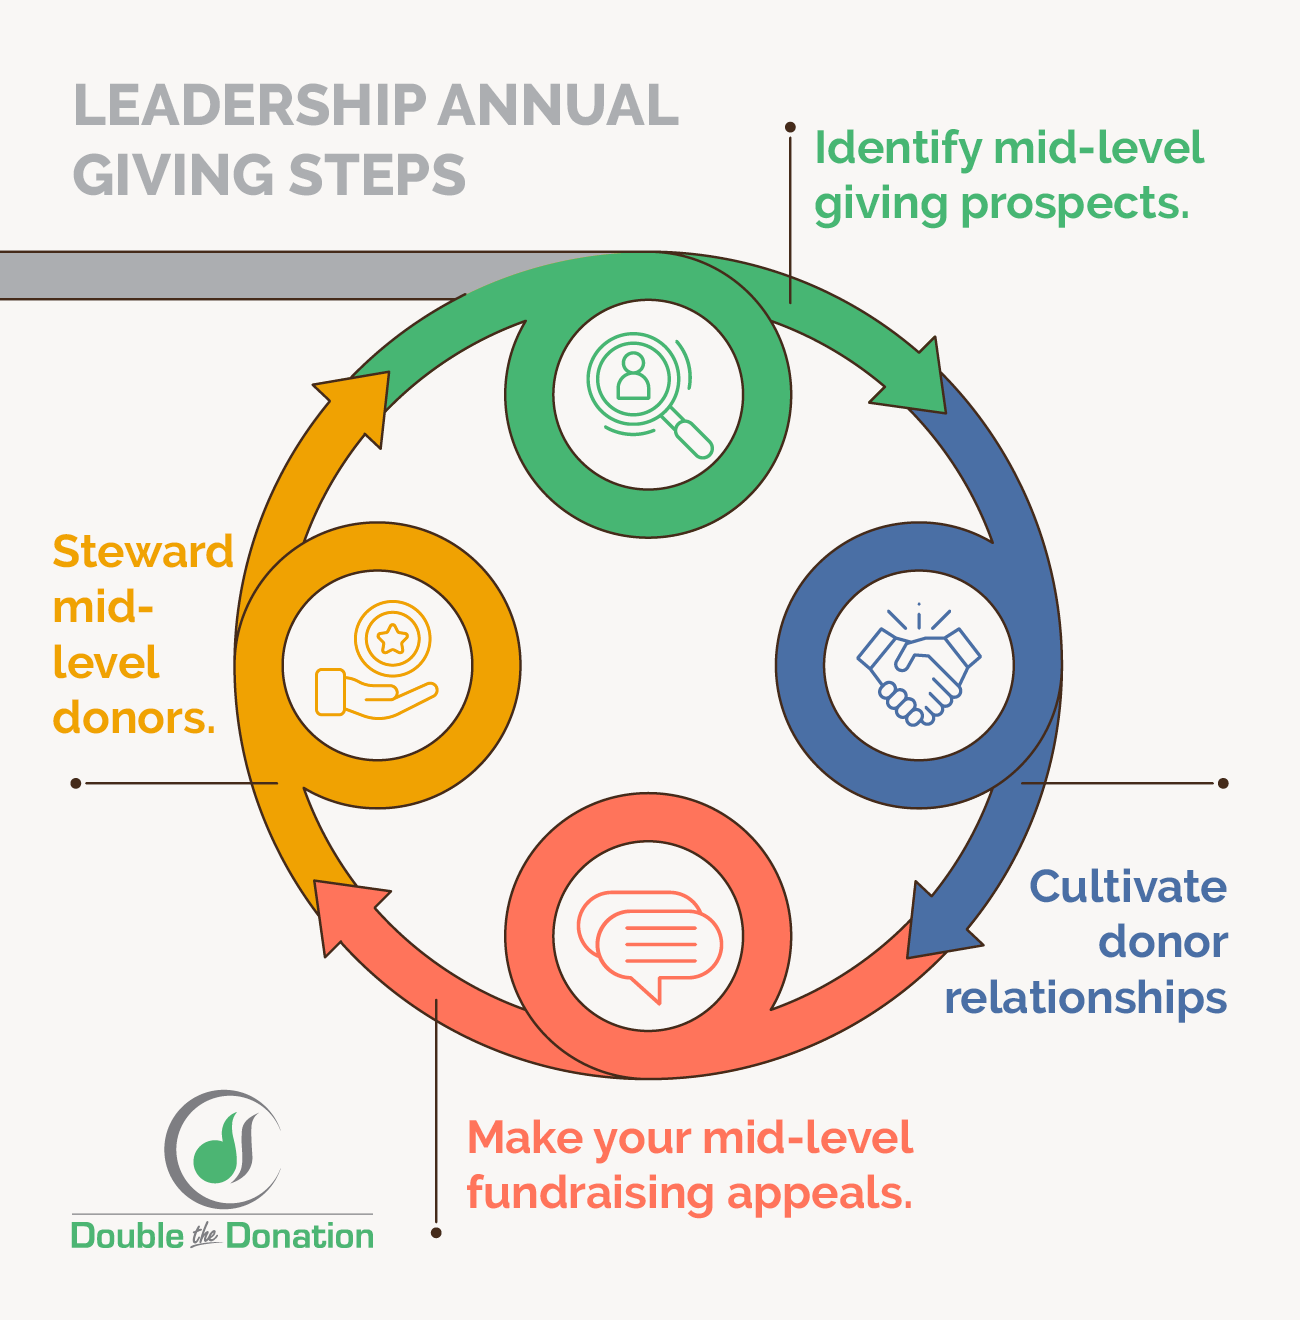 An image displaying the steps to mid-level fundraising, which are described in the text below.